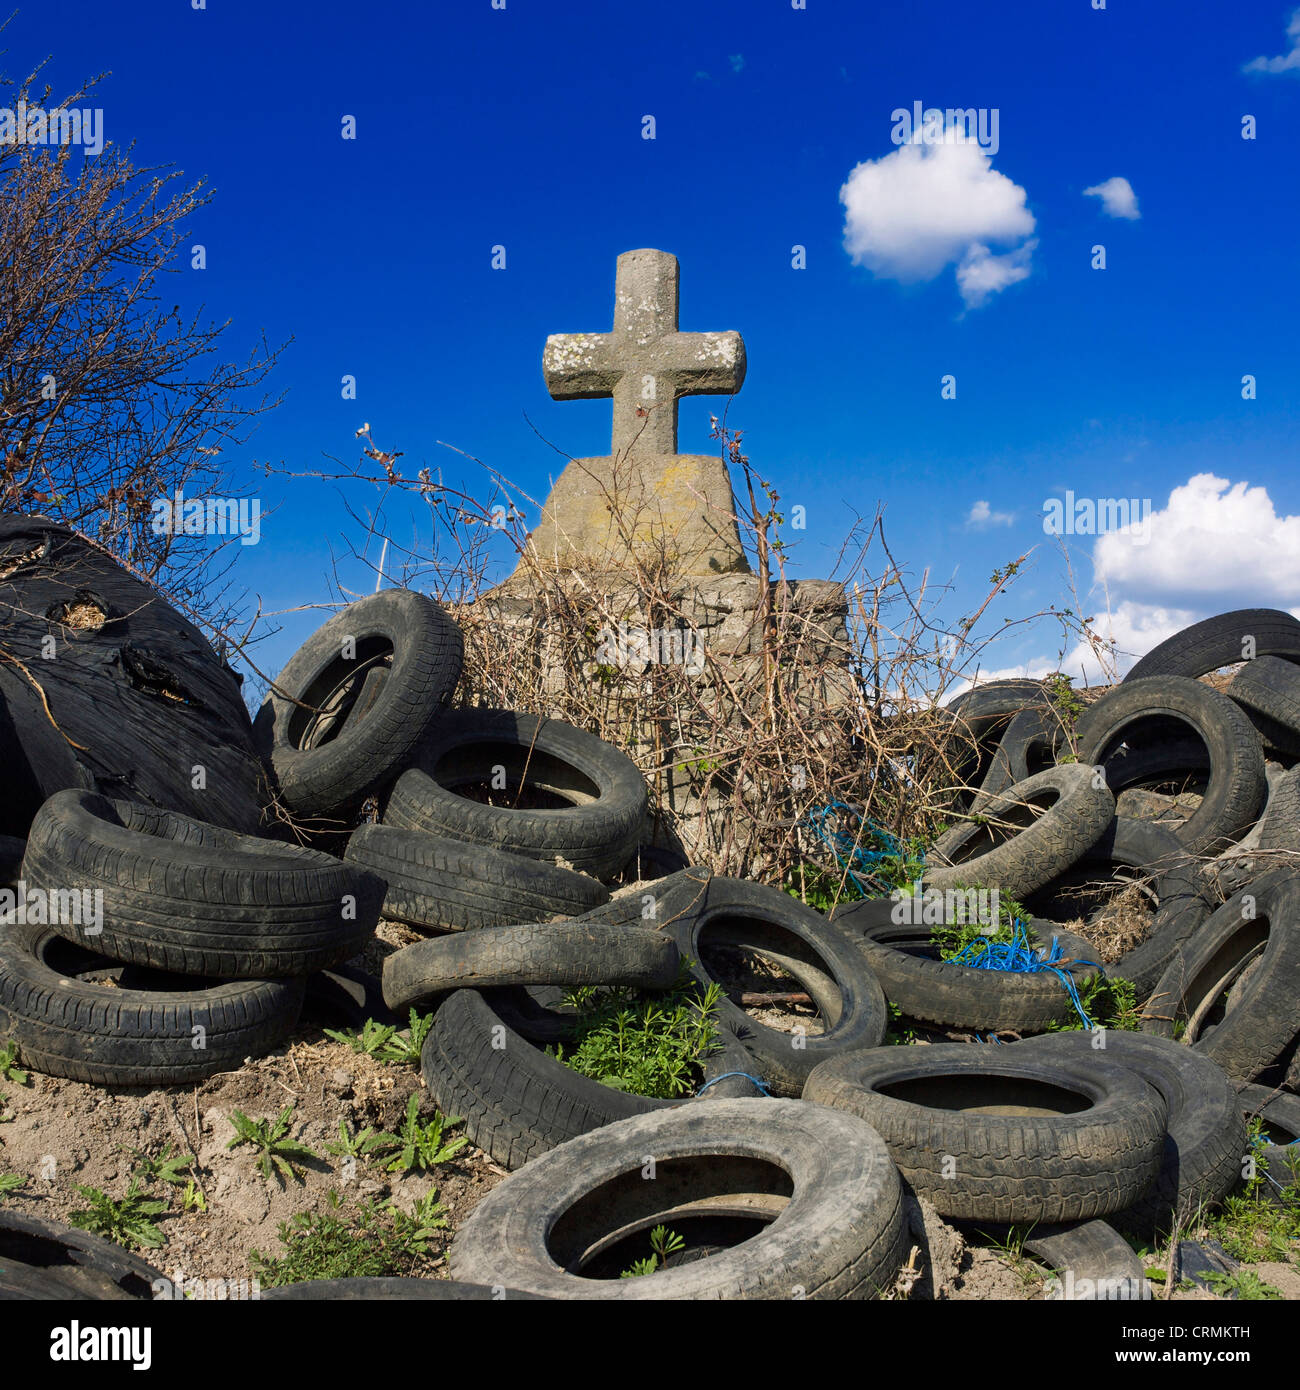 Stone cross and heap of discarded tires, Auvergne-rhone-Alpes, France Stock Photo